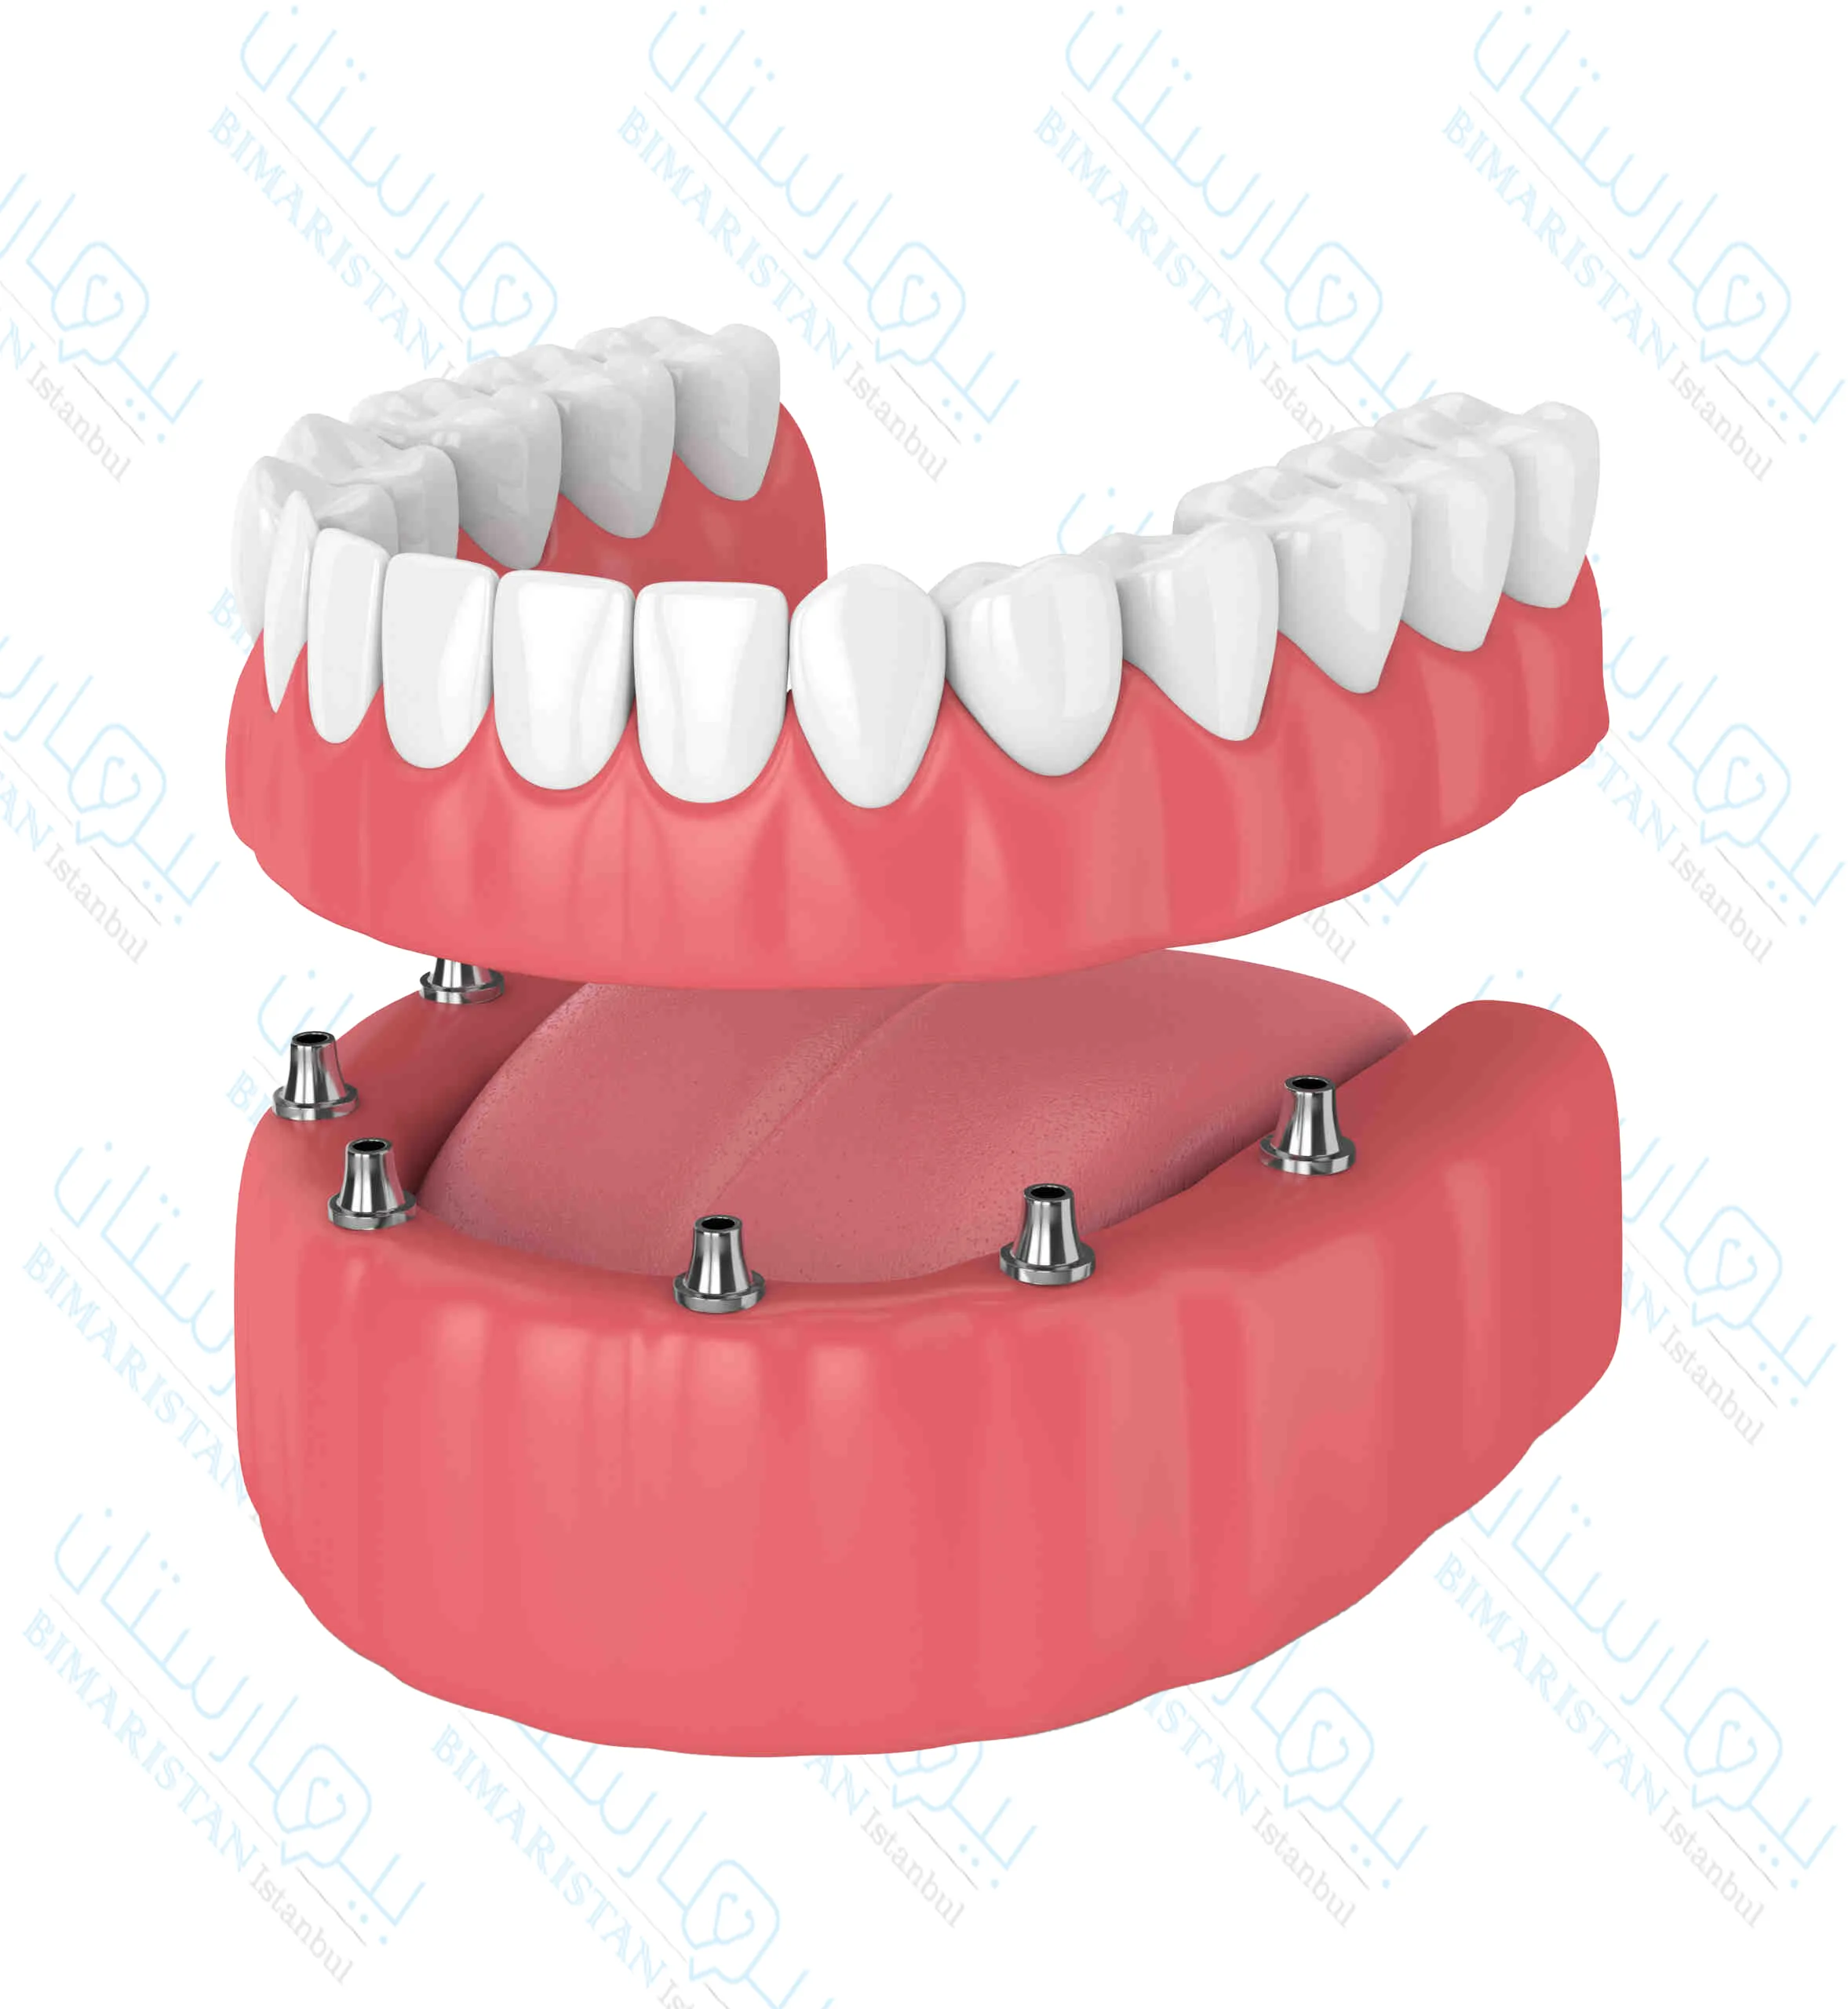 Partial dentures supported by implants implanted into the jawbone